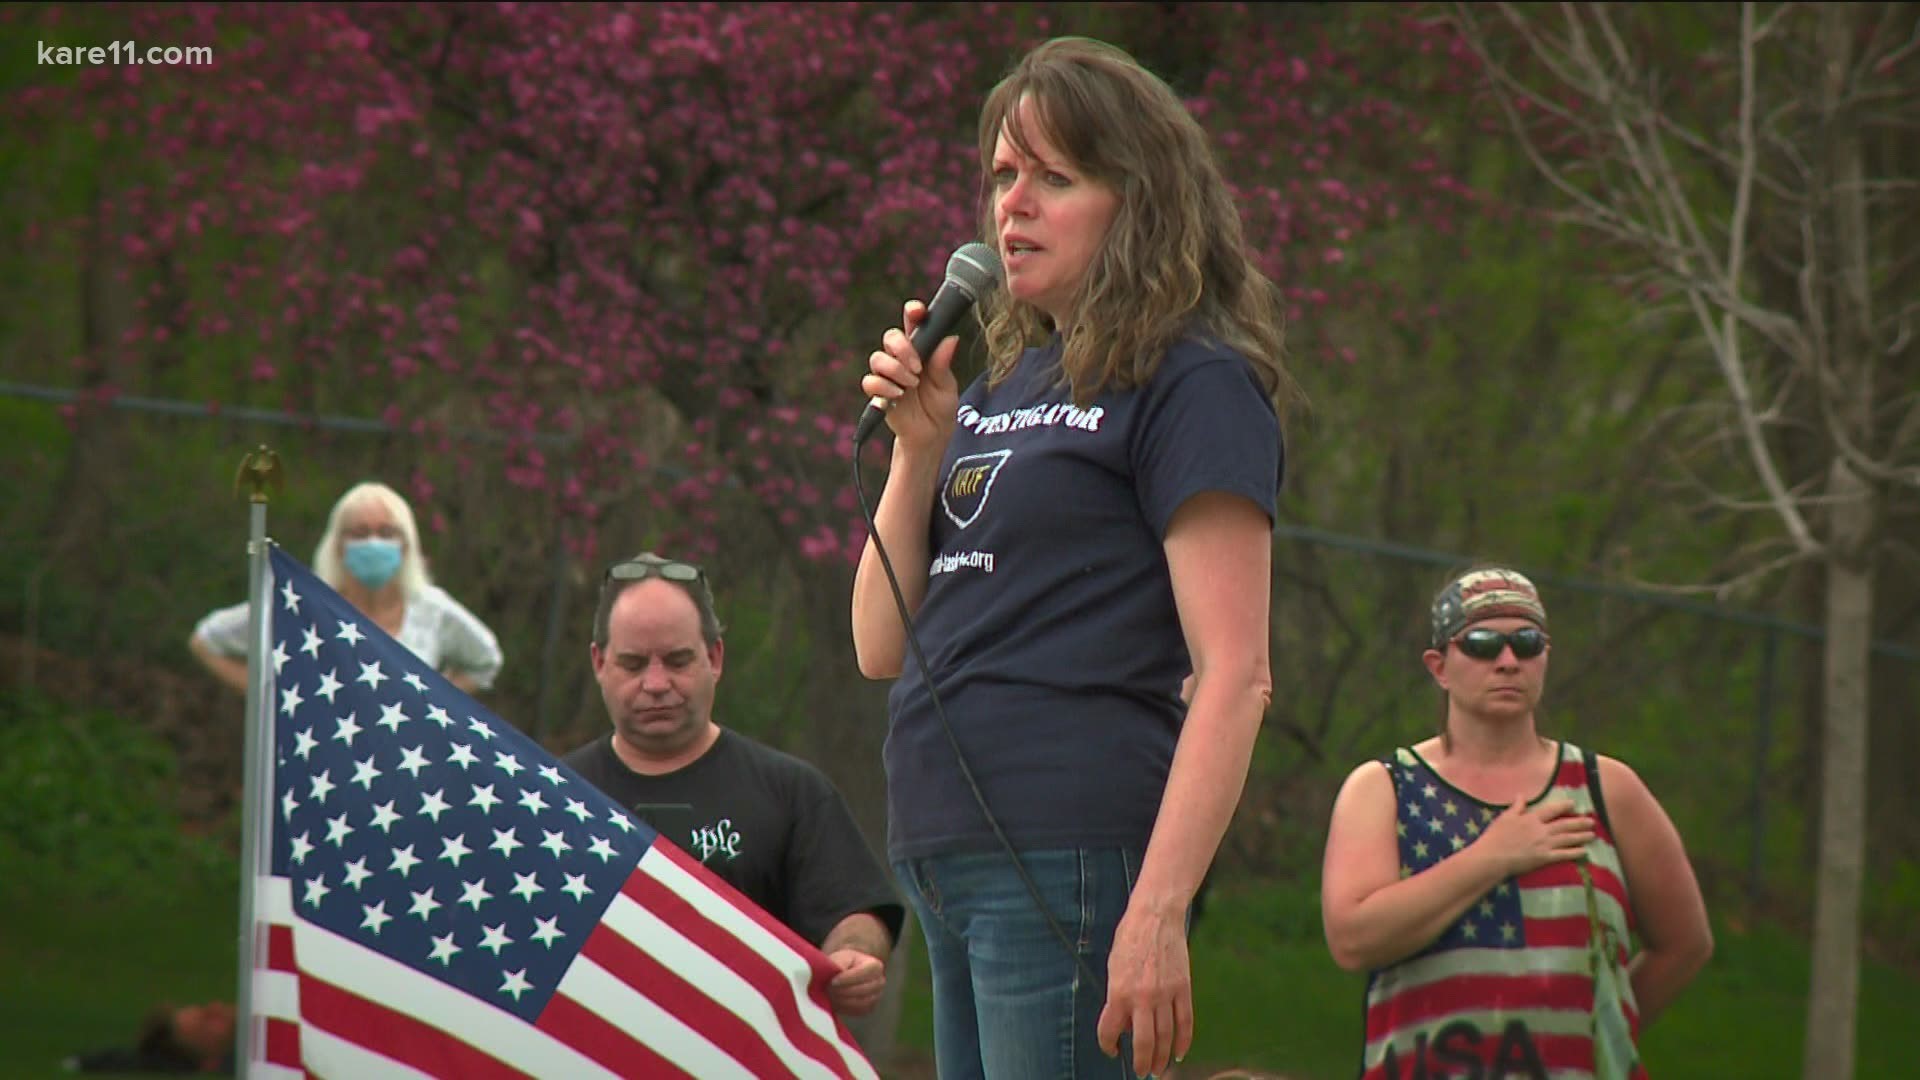 Lisa Hanson spoke during the "Stand for Liberty" rally in Albert Lea Saturday afternoon. The event raised money for her legal fund.